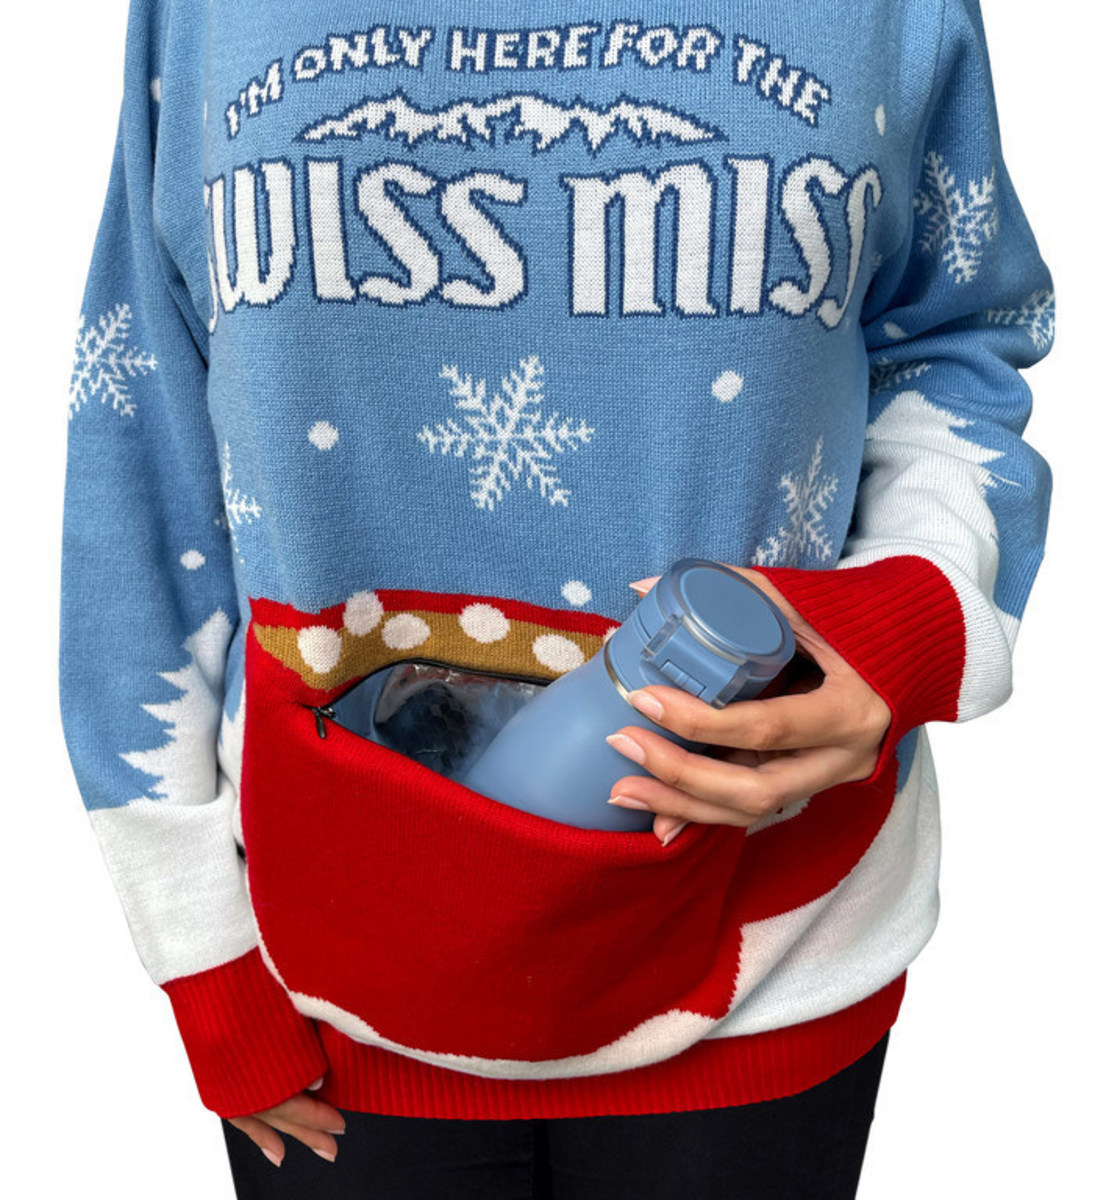 ugly-sweater-day-is-december-17th